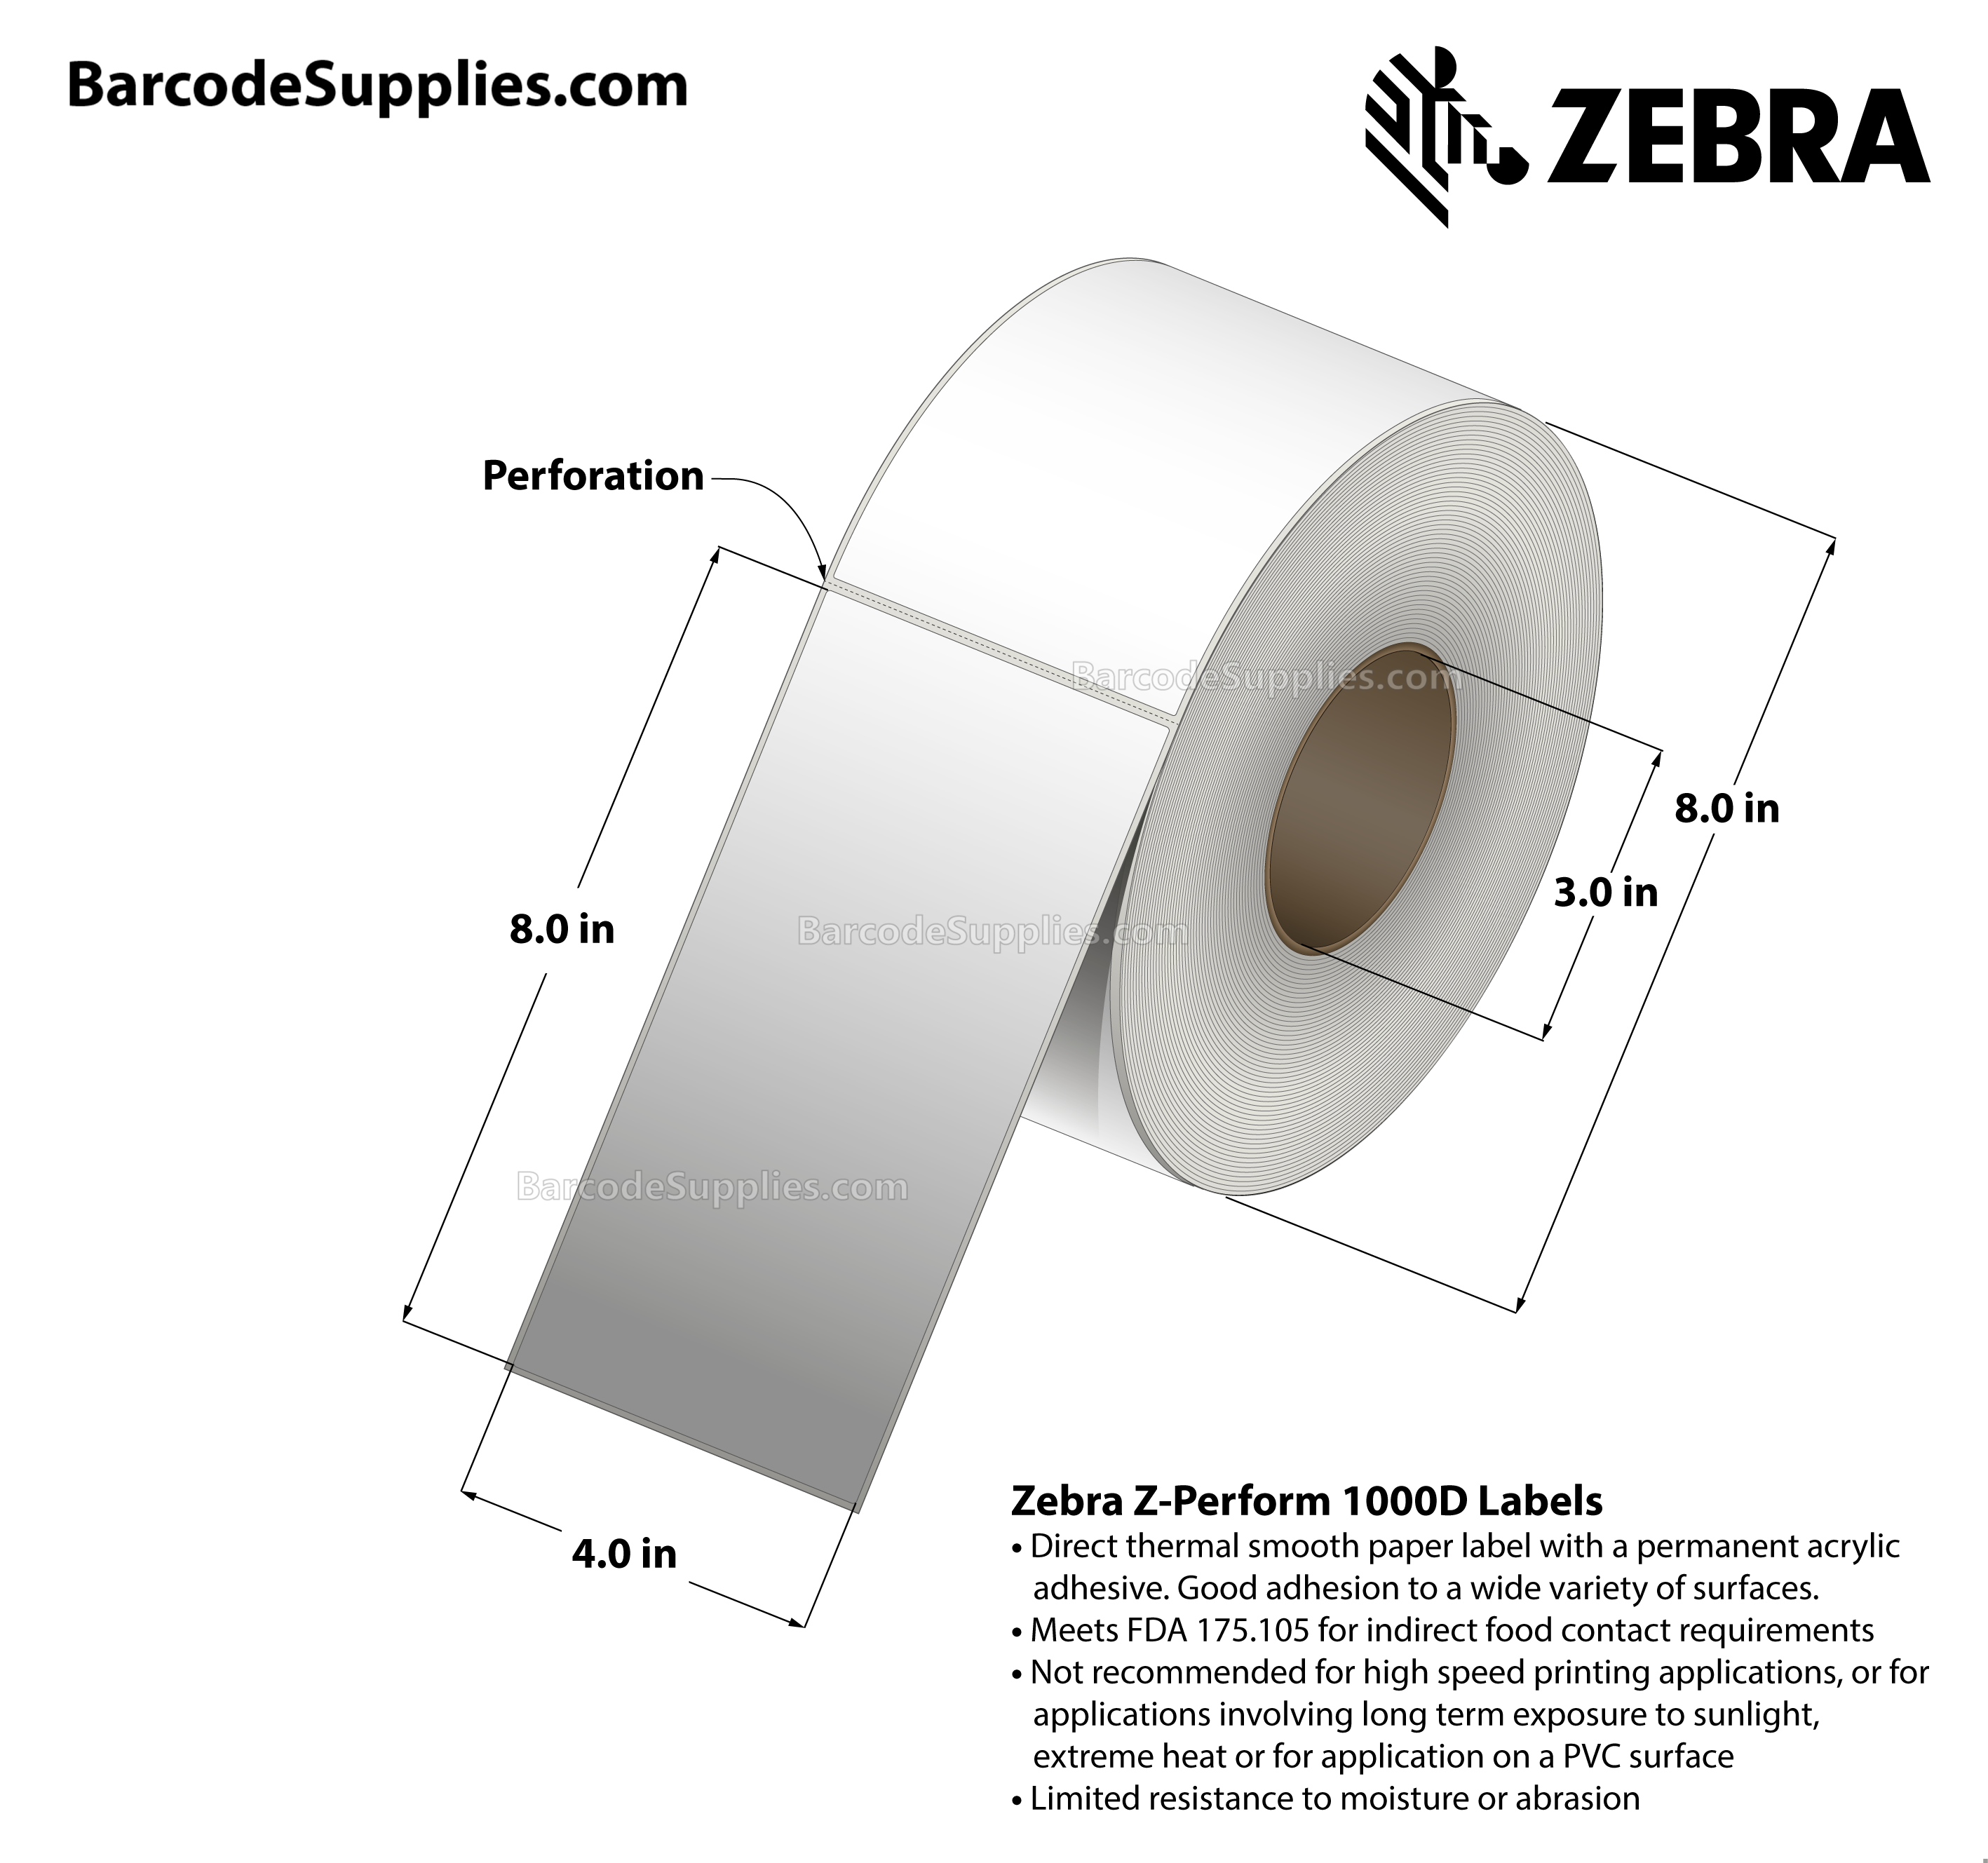 4 x 8 Direct Thermal White Z-Perform 1000D Labels With Permanent Adhesive - Perforated - 750 Labels Per Roll - Carton Of 4 Rolls - 3000 Labels Total - MPN: 10023701